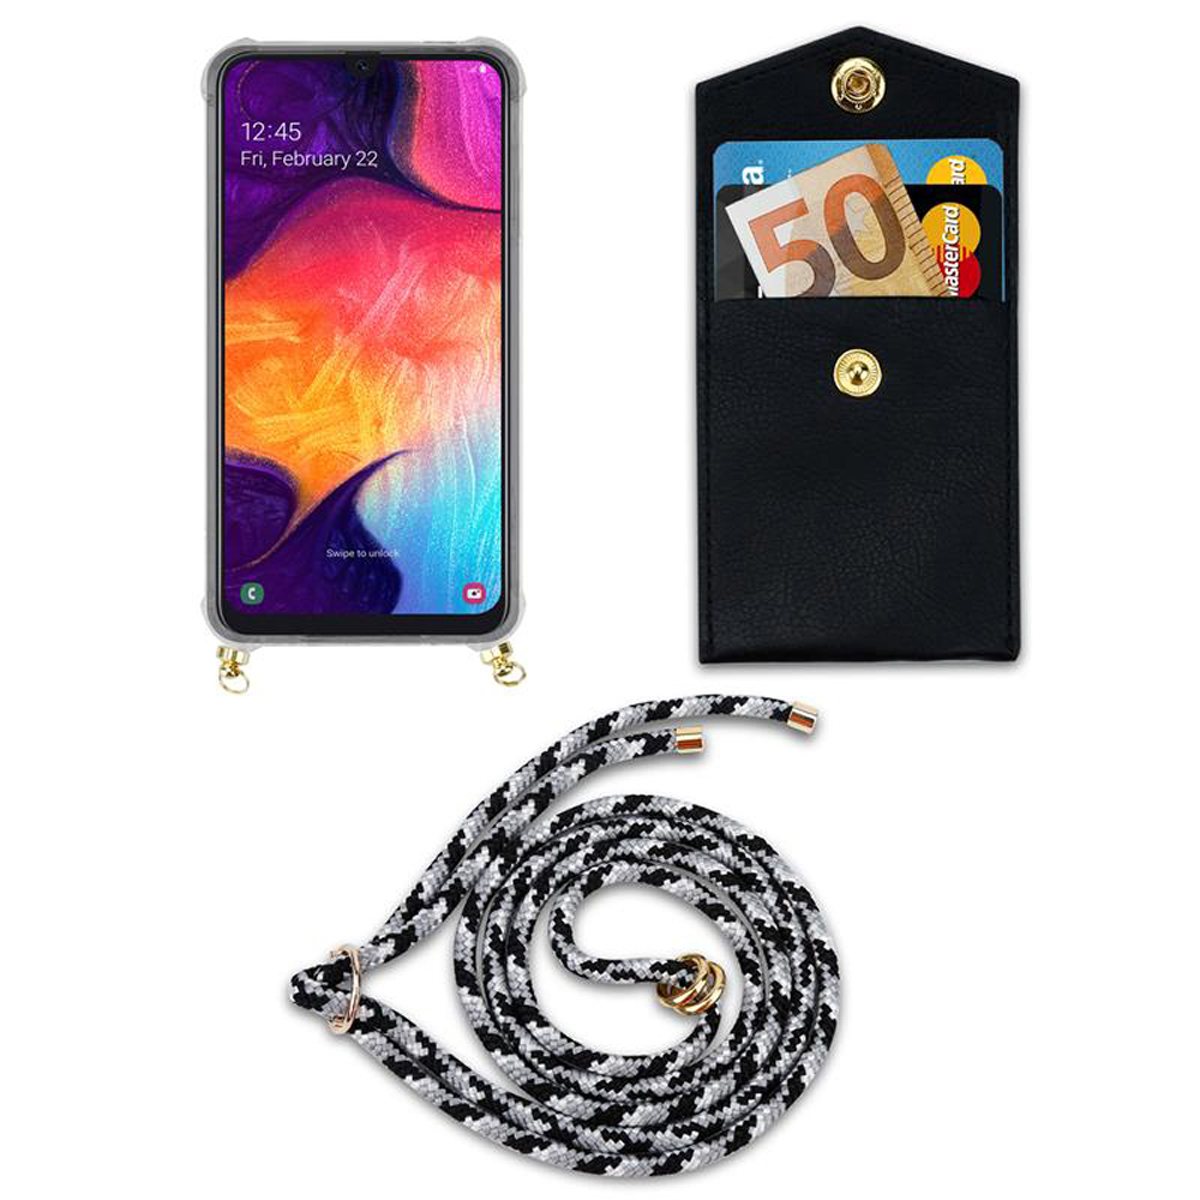 Kette A50 mit abnehmbarer Gold Kordel Galaxy A30s, Ringen, / SCHWARZ 4G CADORABO / und Samsung, CAMOUFLAGE Band Handy Hülle, A50s Backcover,